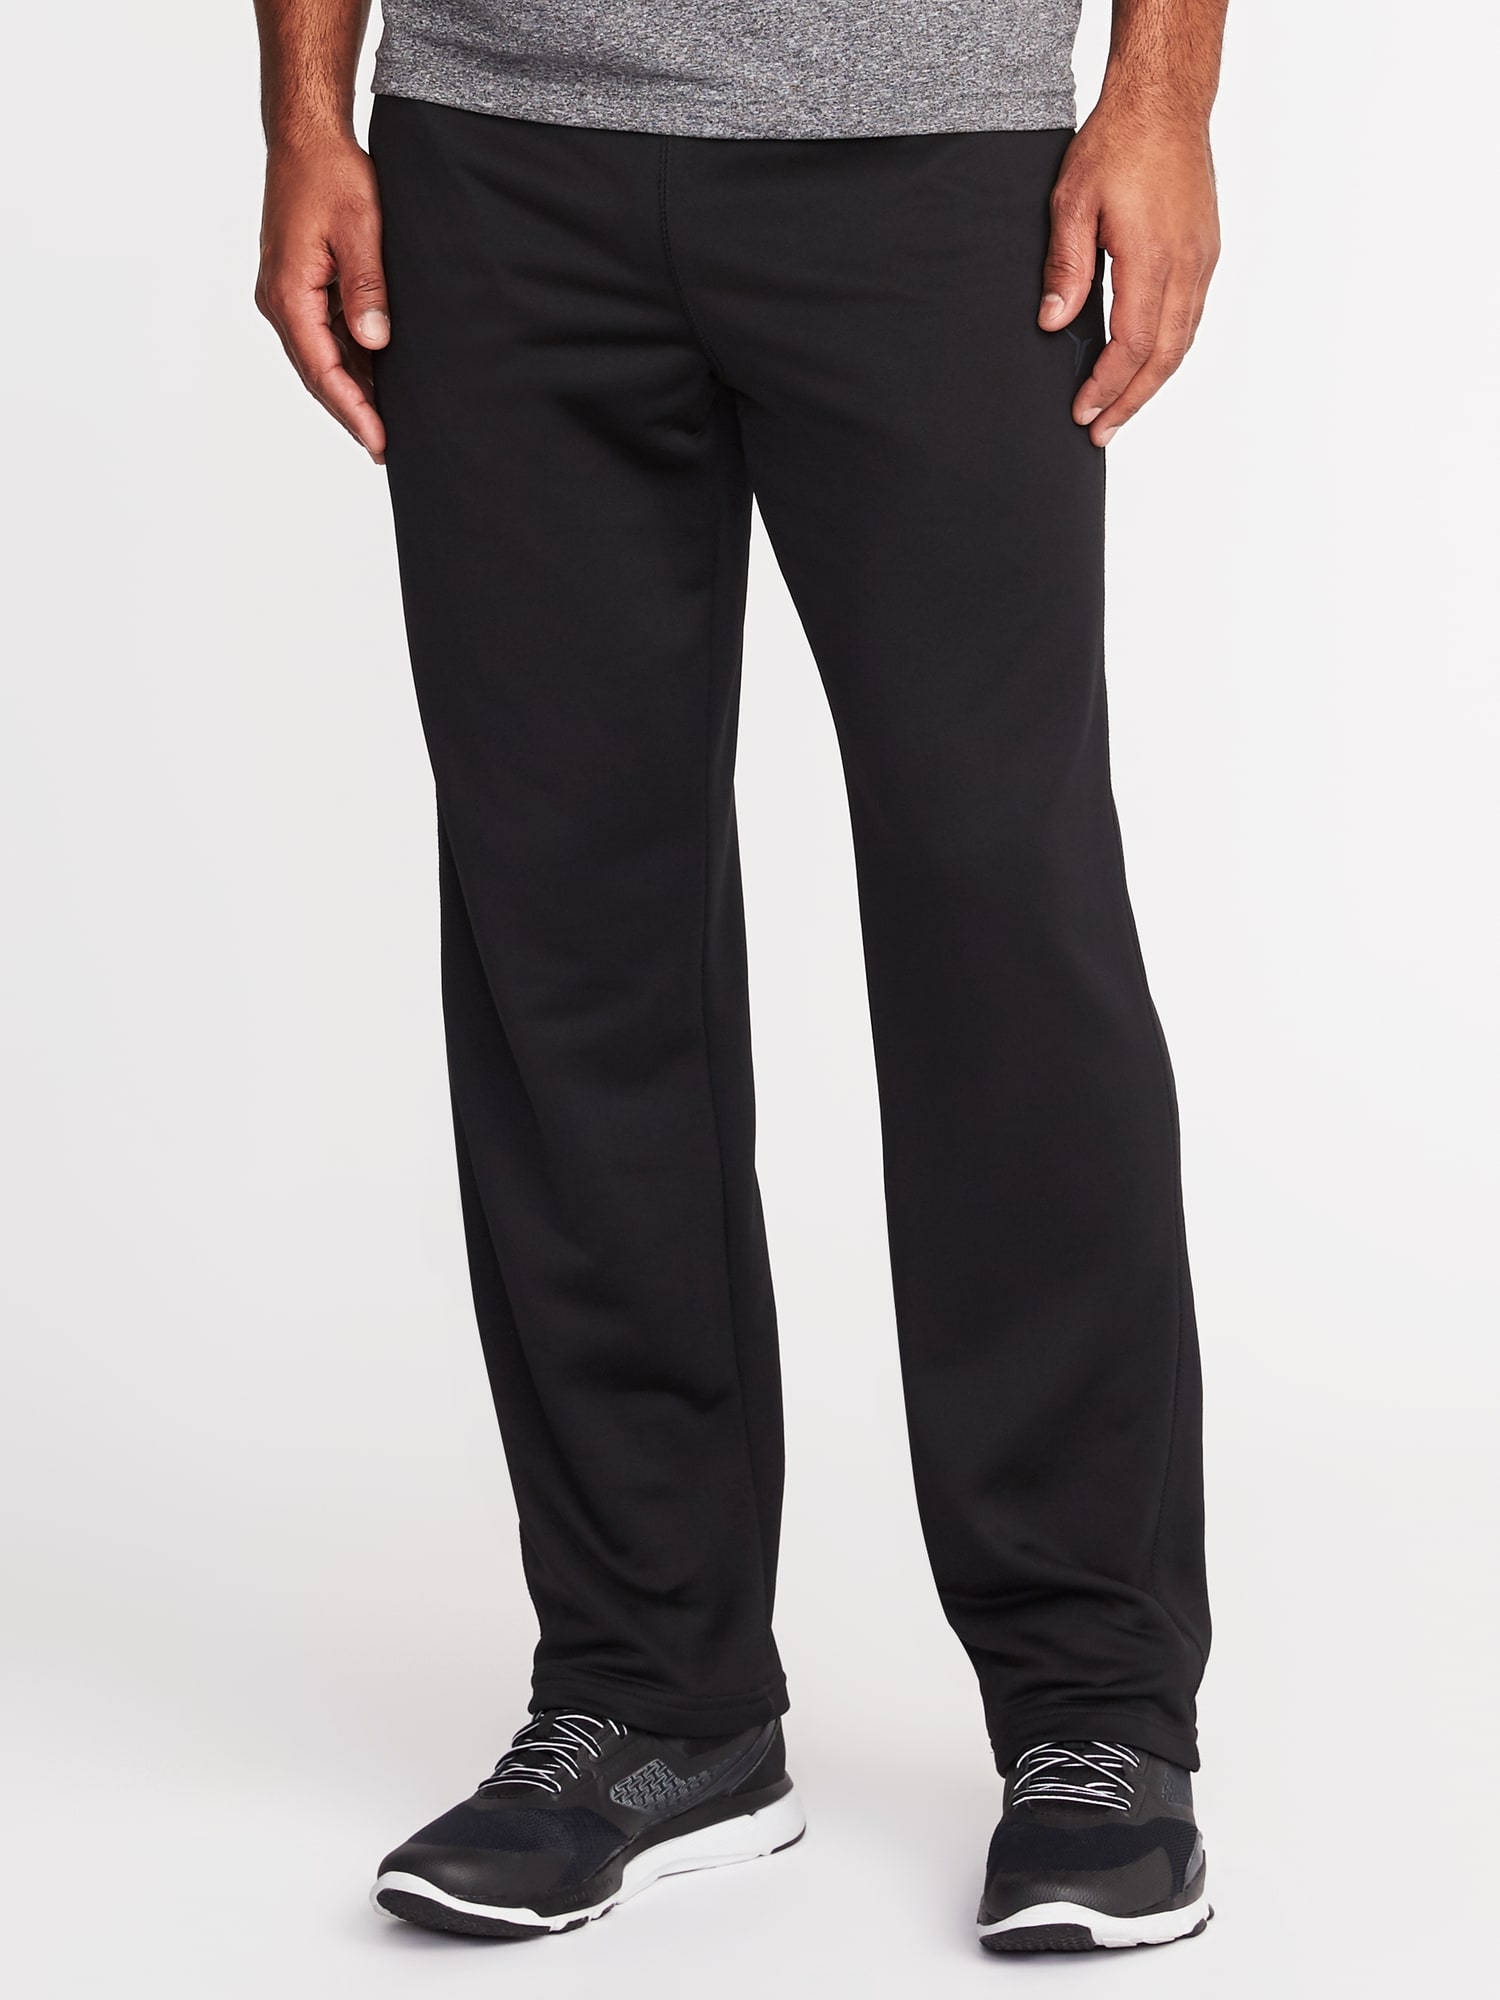 Go-Dry French Terry Pants for Men | Old Navy